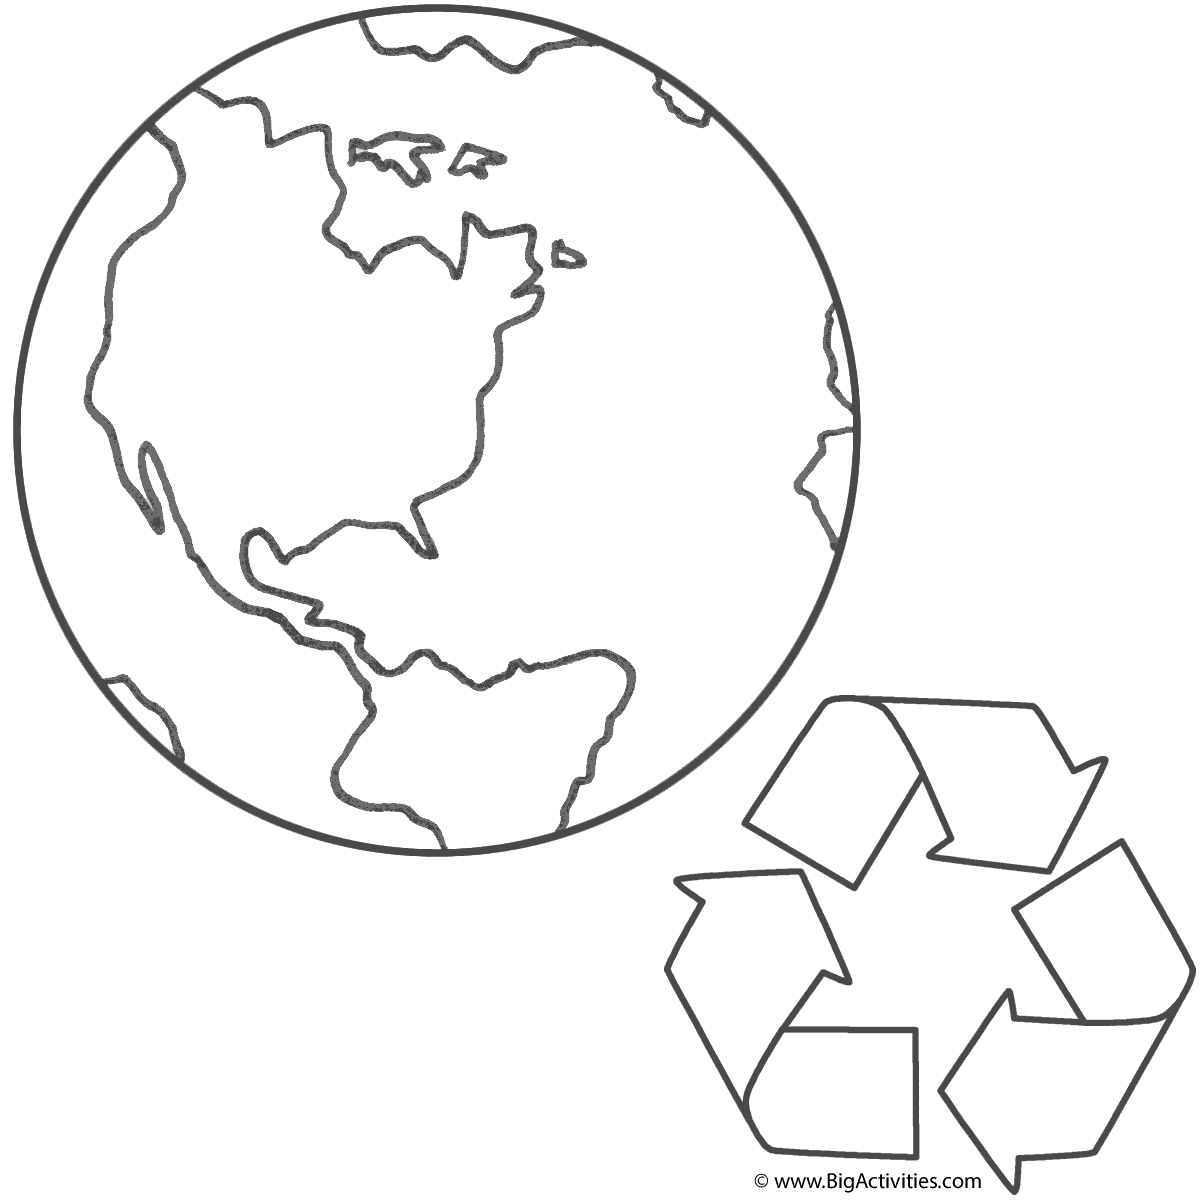 earth planet coloring page